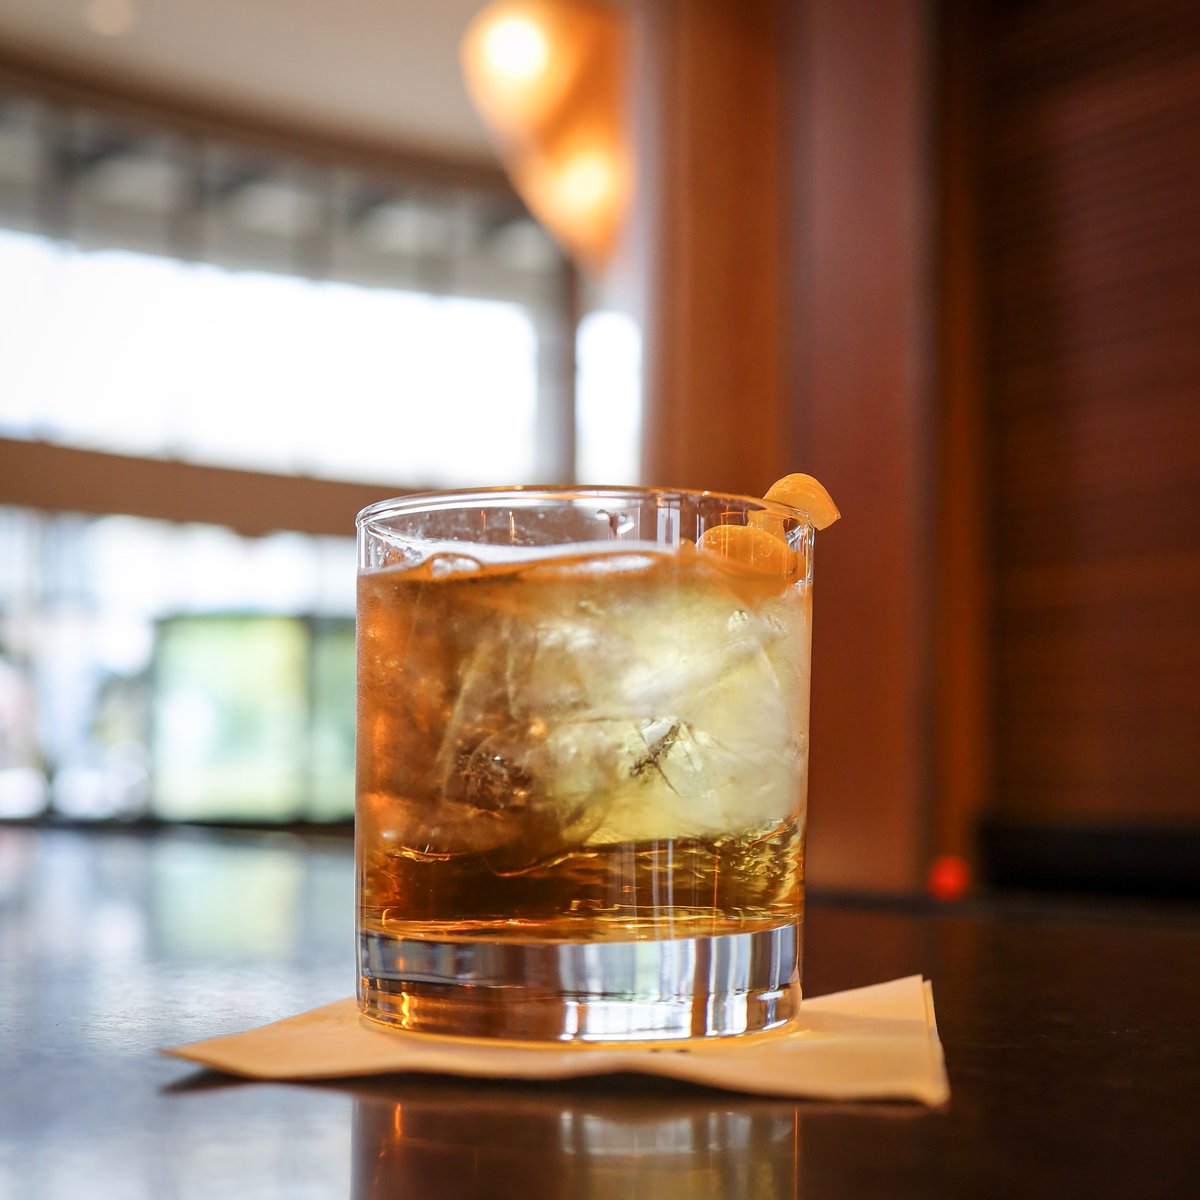 Transport to the world of whiskey as you approach the bar tomorrow tonight. 🥃

Sip and savor the perfectly crafted Raleigh Rusty Nail at @41hundredlounge in honor of International Whiskey Day. 

#renaissancehotel #visitnorthhills #visitraleigh #whiskeylovers